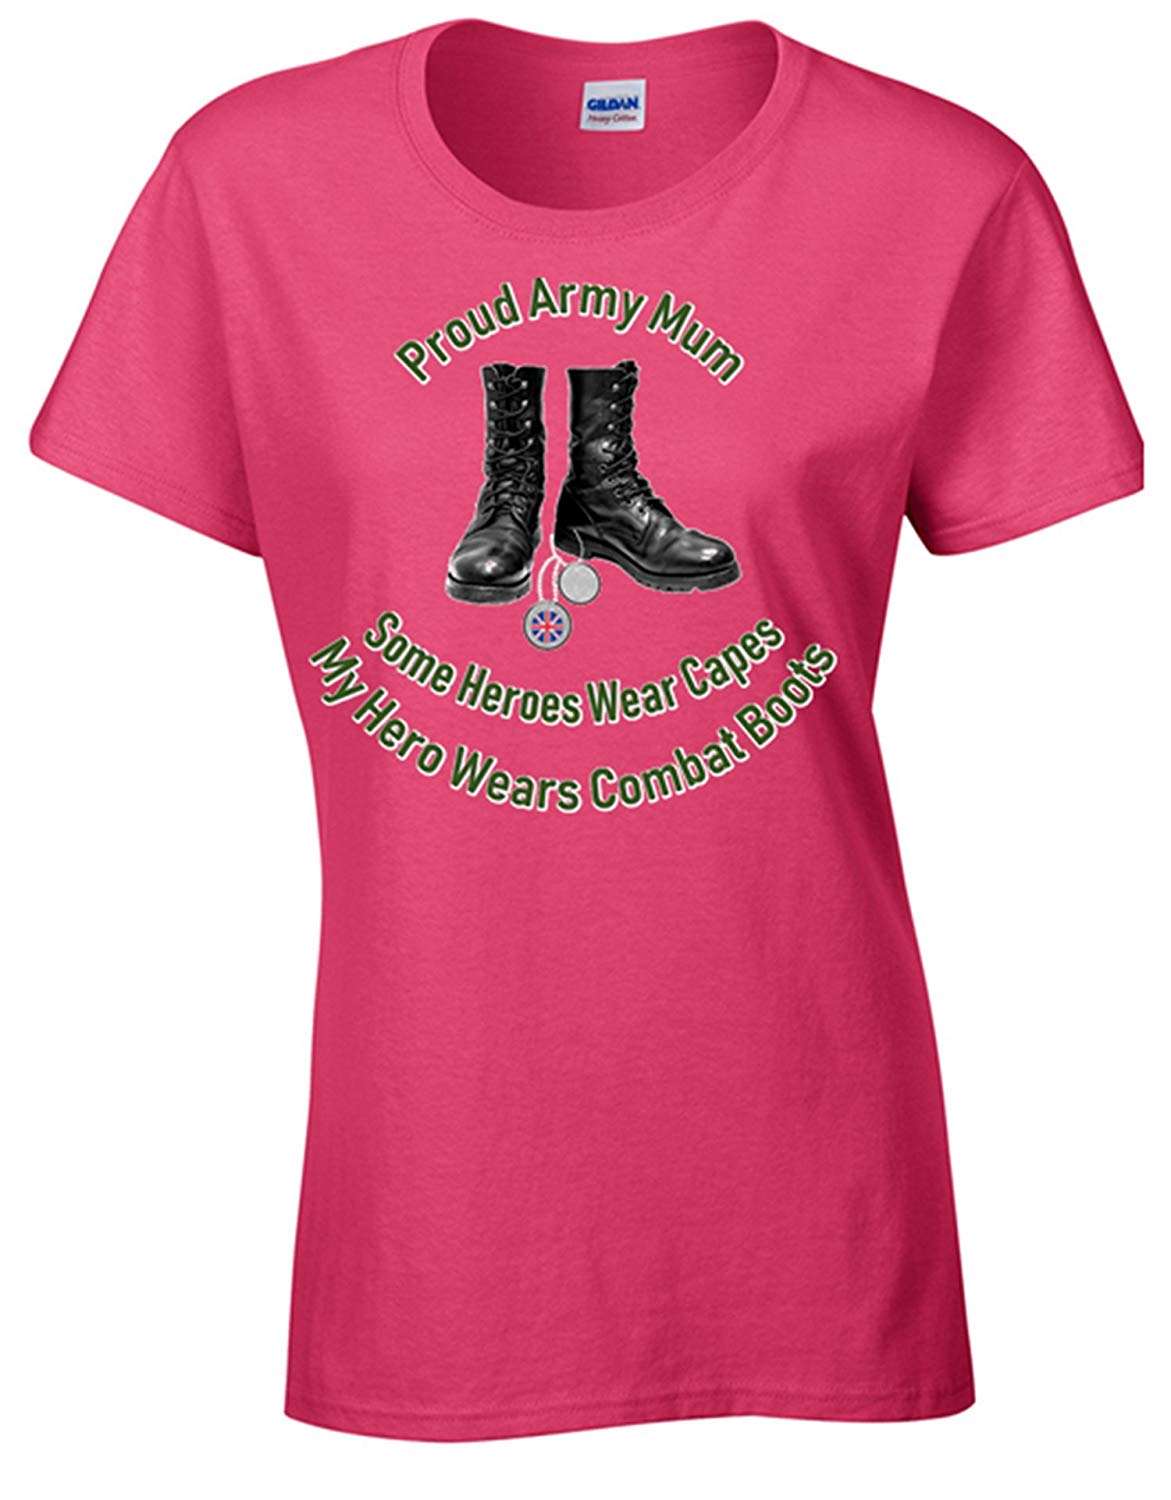 Bear Essentials Proud Army Mum T-Shirt - Army 1157 kit Pink / XL Army 1157 Kit Veterans Owned Business